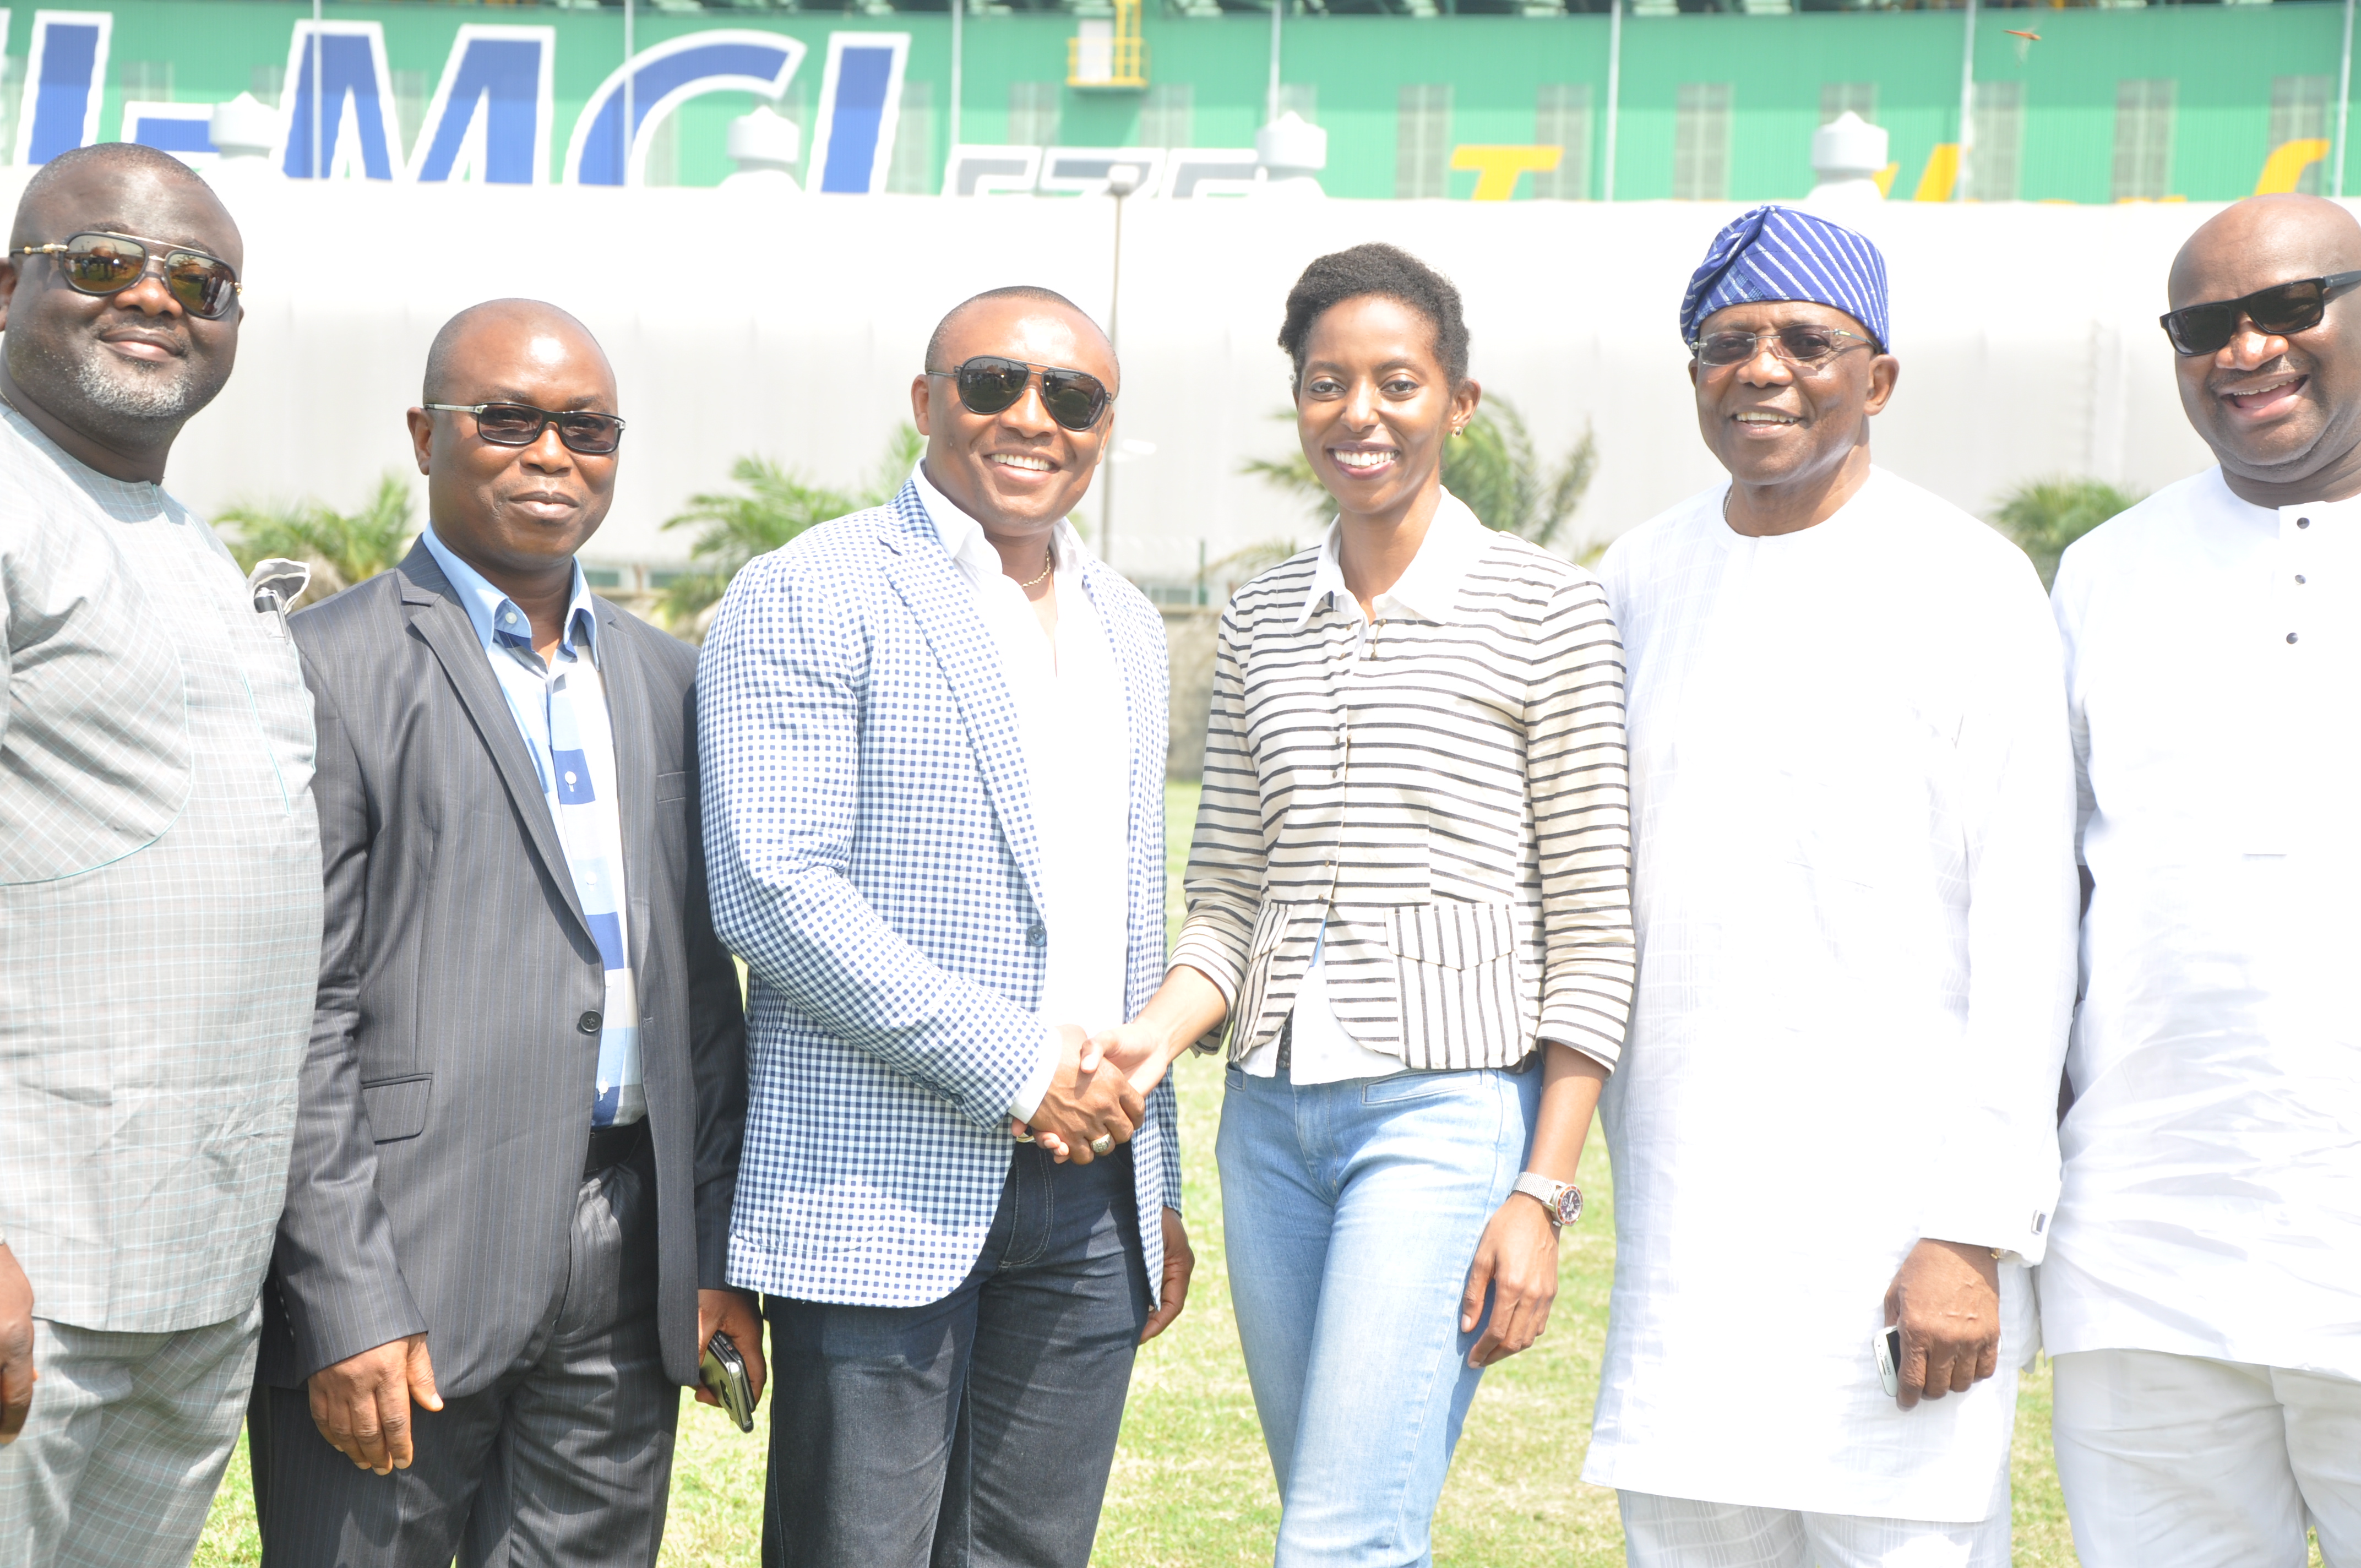 L-R: Chairman, House Committee on Banking and Finance, Toby Okechukwu; Executive Secretary, Nigerian Content Development and Monitoring Board (NCDMB), Obah Patrick; Chairman, House Committee on Local Content, Emmanuel Ekon; Managing Director, Lagos Deep Offshore Logistics (LADOL), Dr. Amy Jadesimi and LADOL Chairman, Mr. Ladi Jadesimi when the lawmakers visited LADOL Free Zone in Apapa, Lagos, Wednesday.